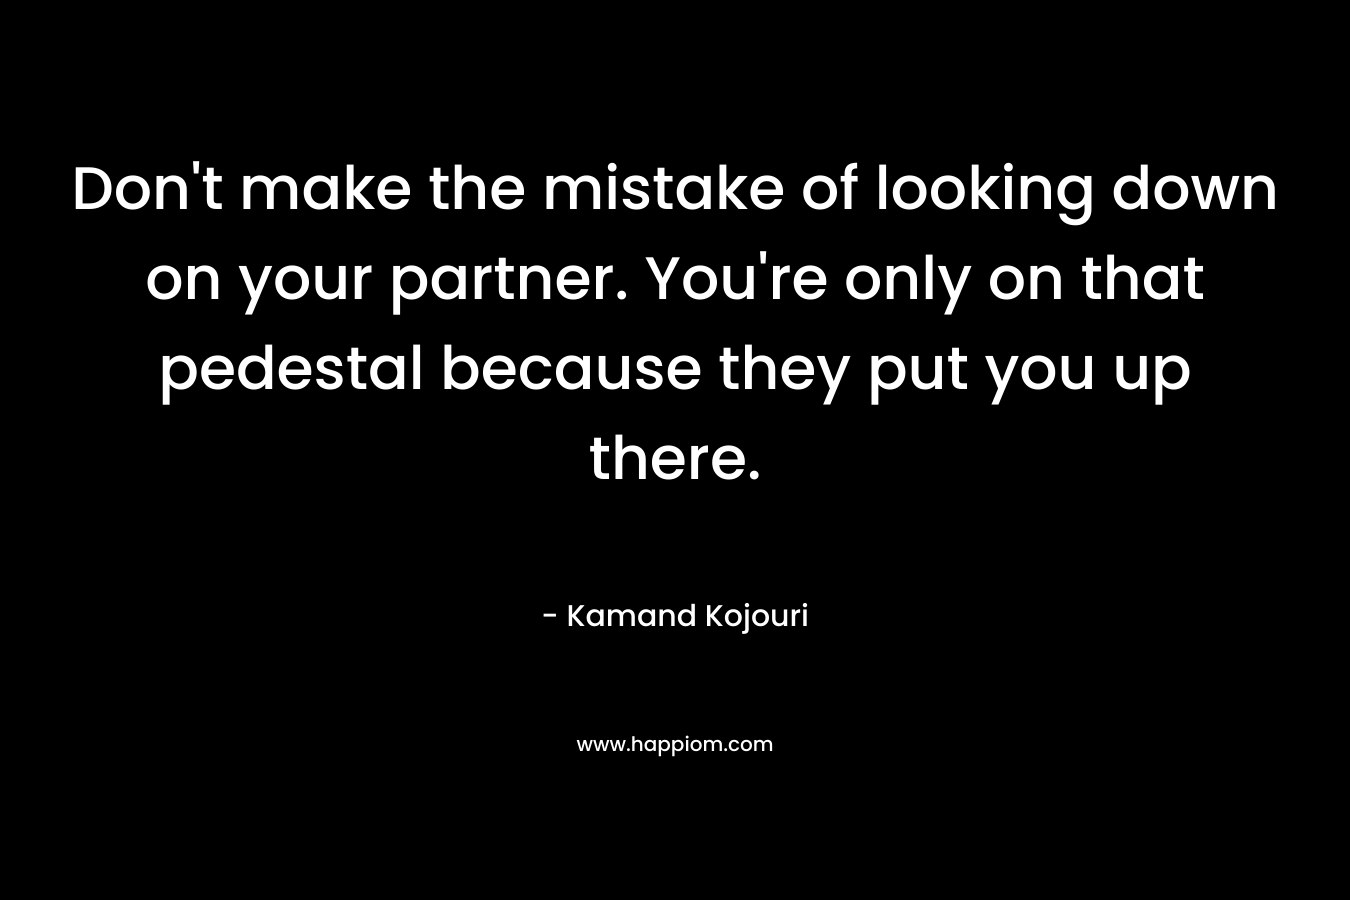 Don't make the mistake of looking down on your partner. You're only on that pedestal because they put you up there.